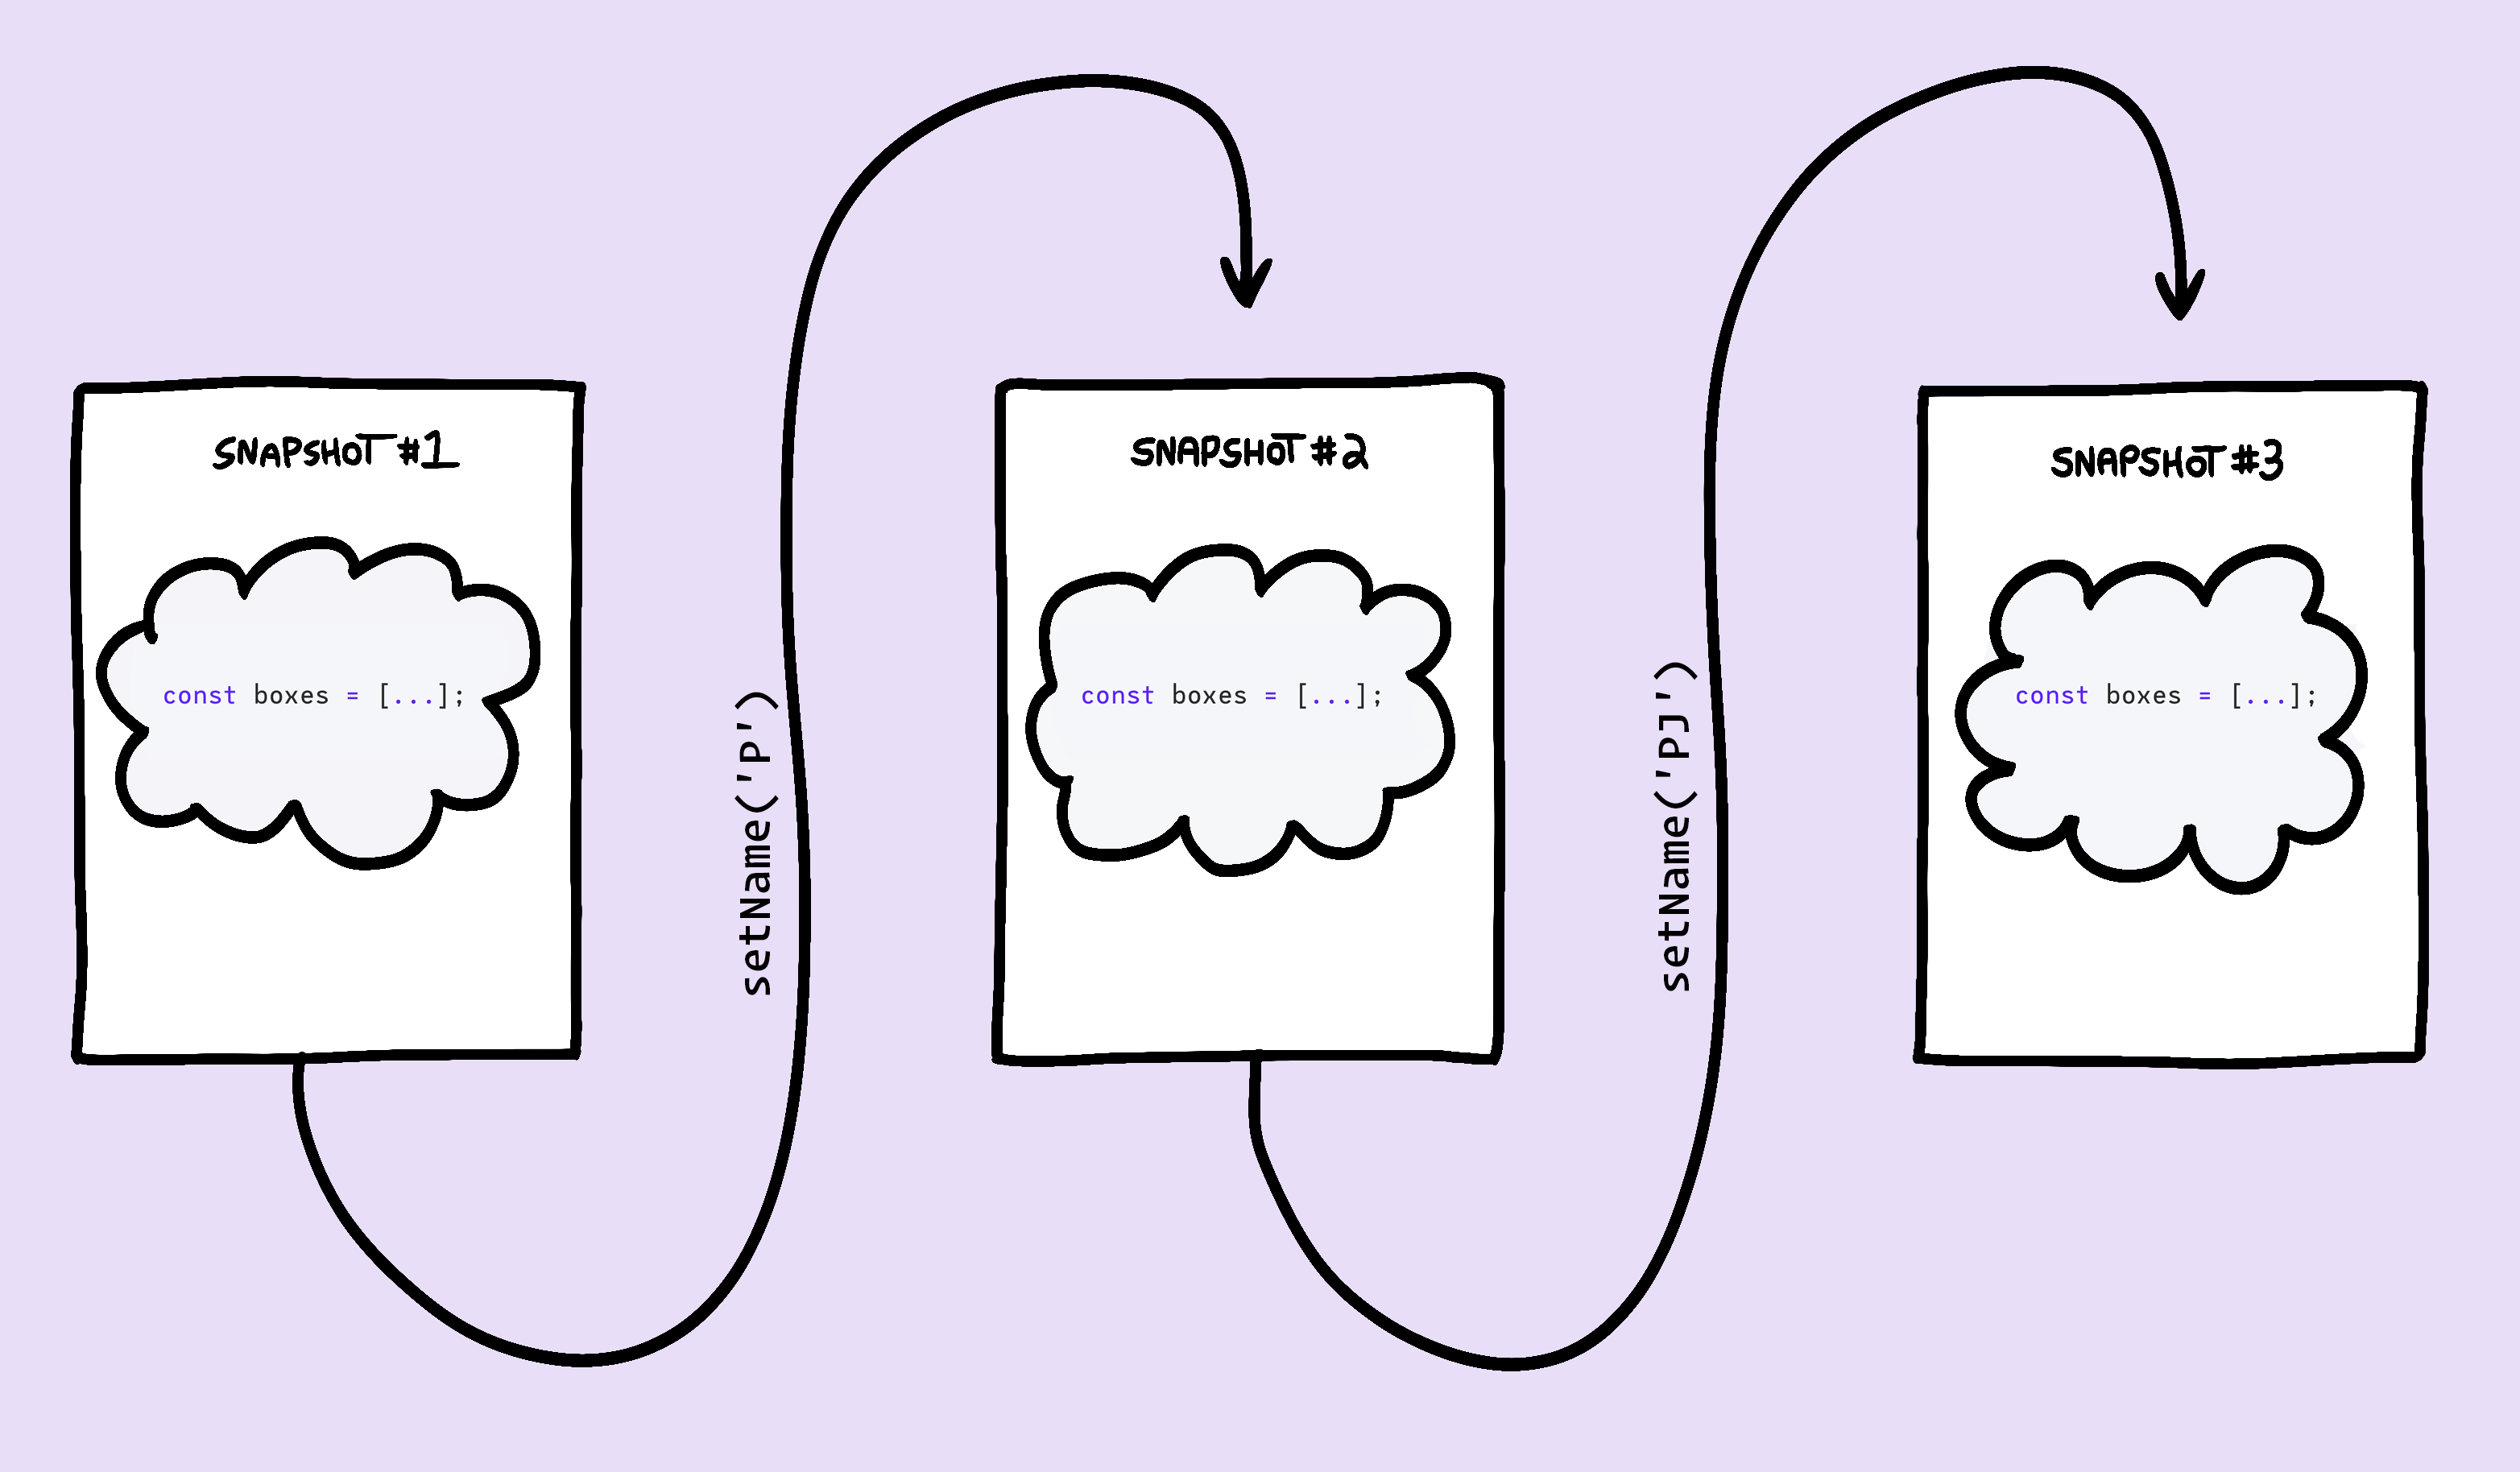 Diagram showing how each snapshot builds a brand new “boxes” array